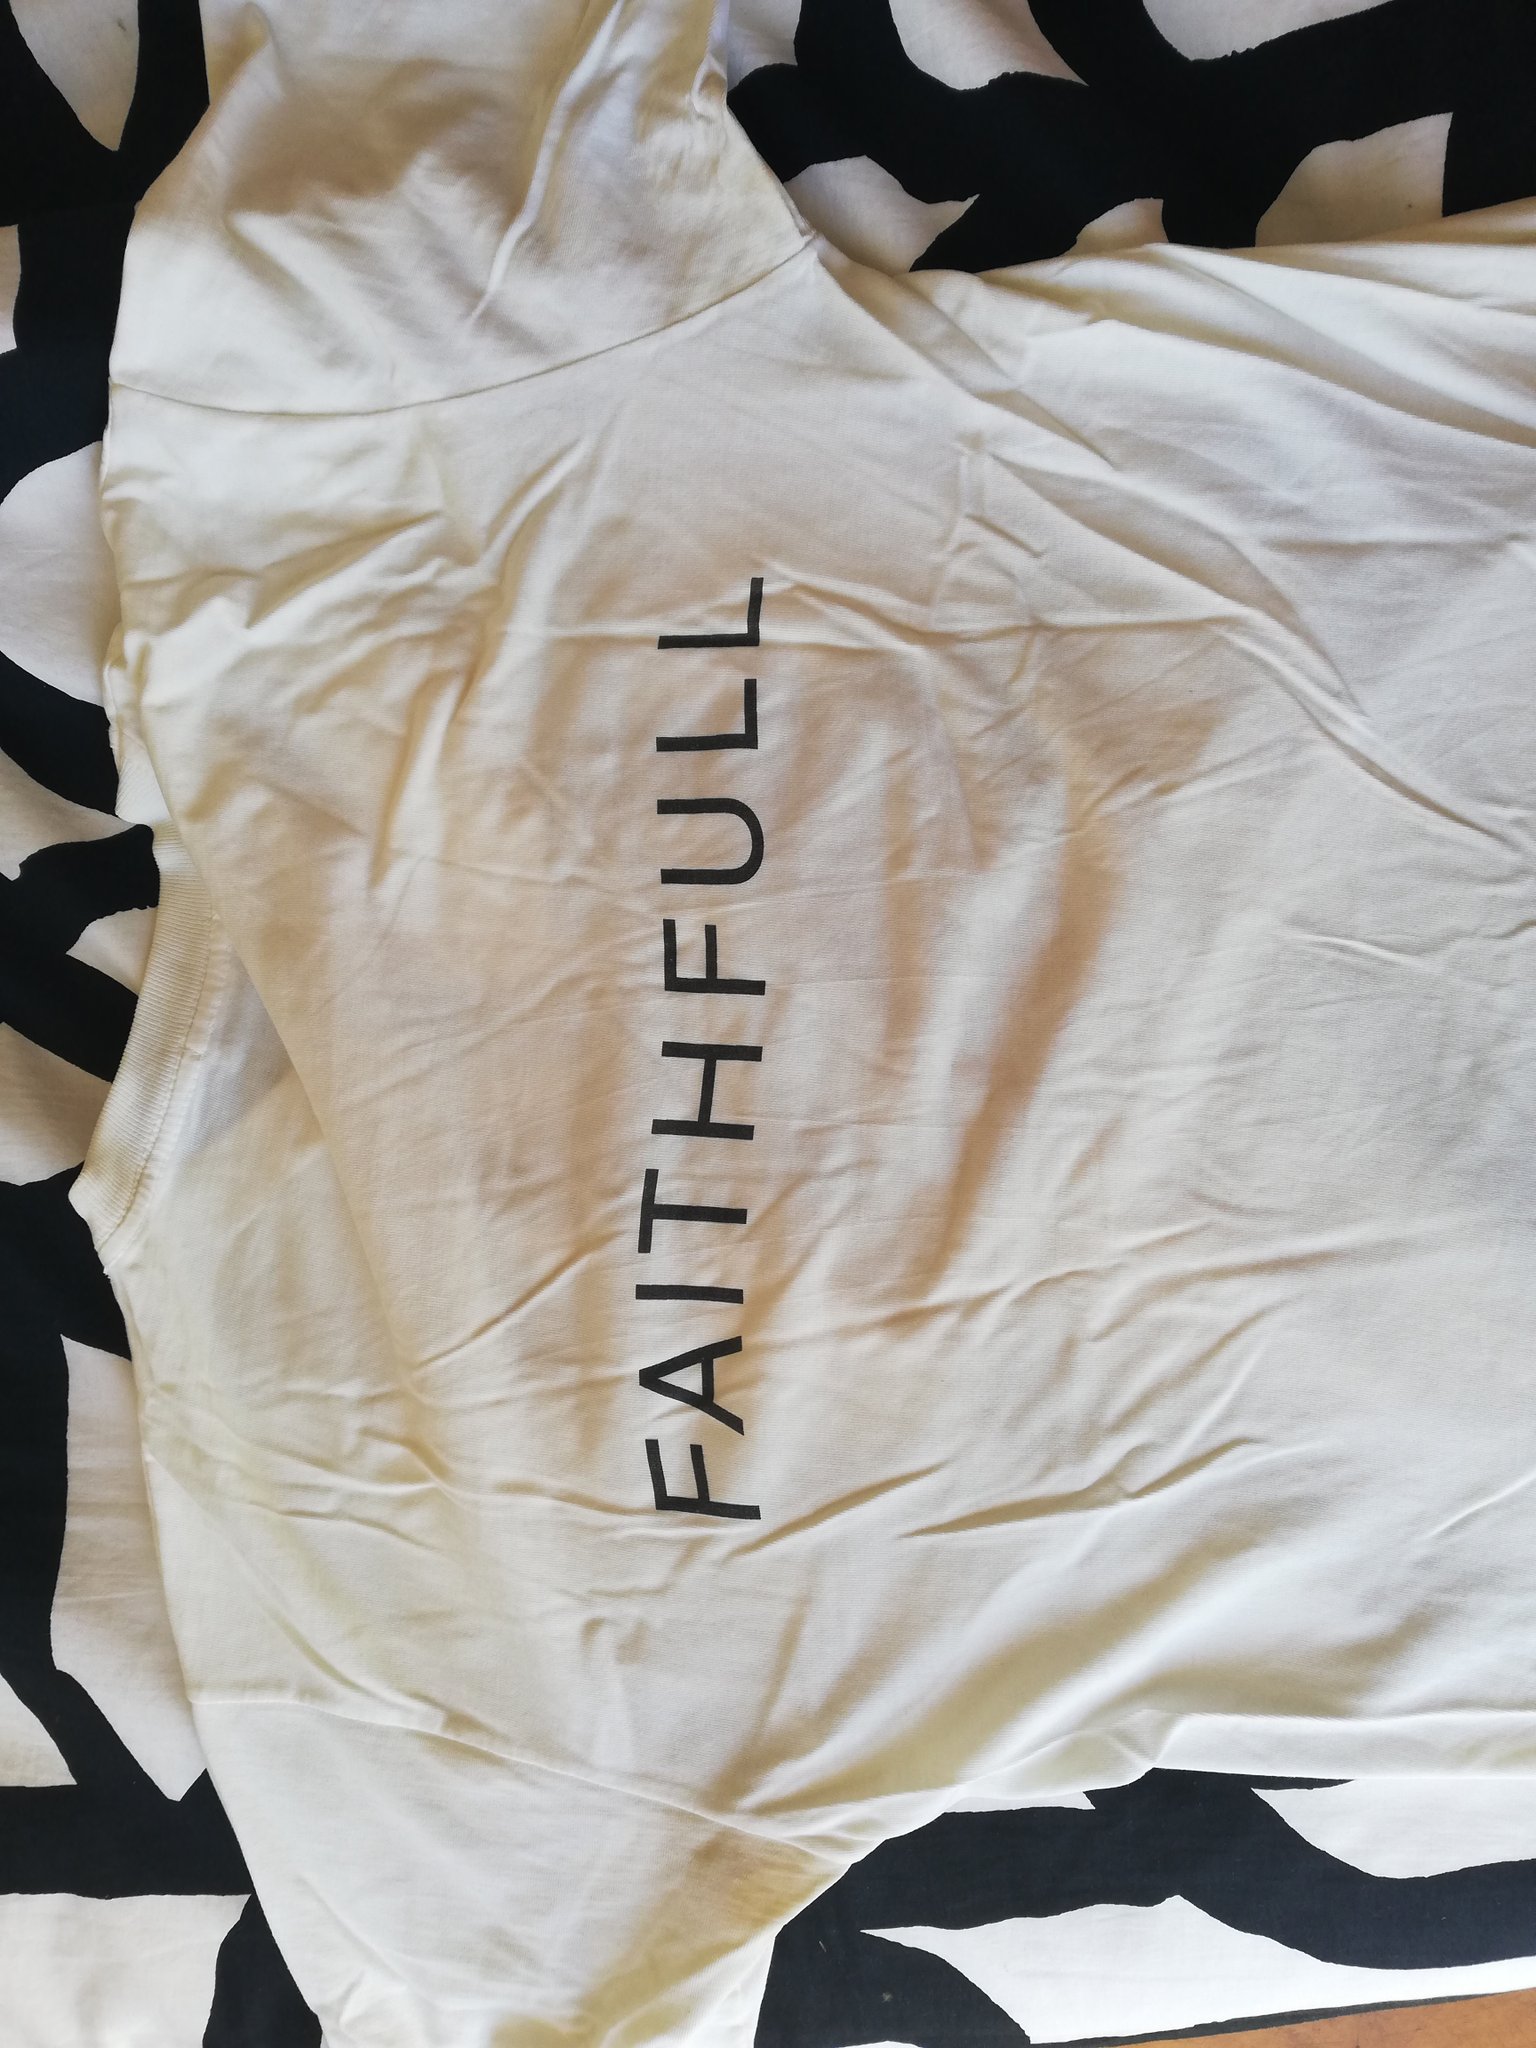 Happy birthday Marianne Faithfull. One of my favourites T-shirts, although it\s very battered. 